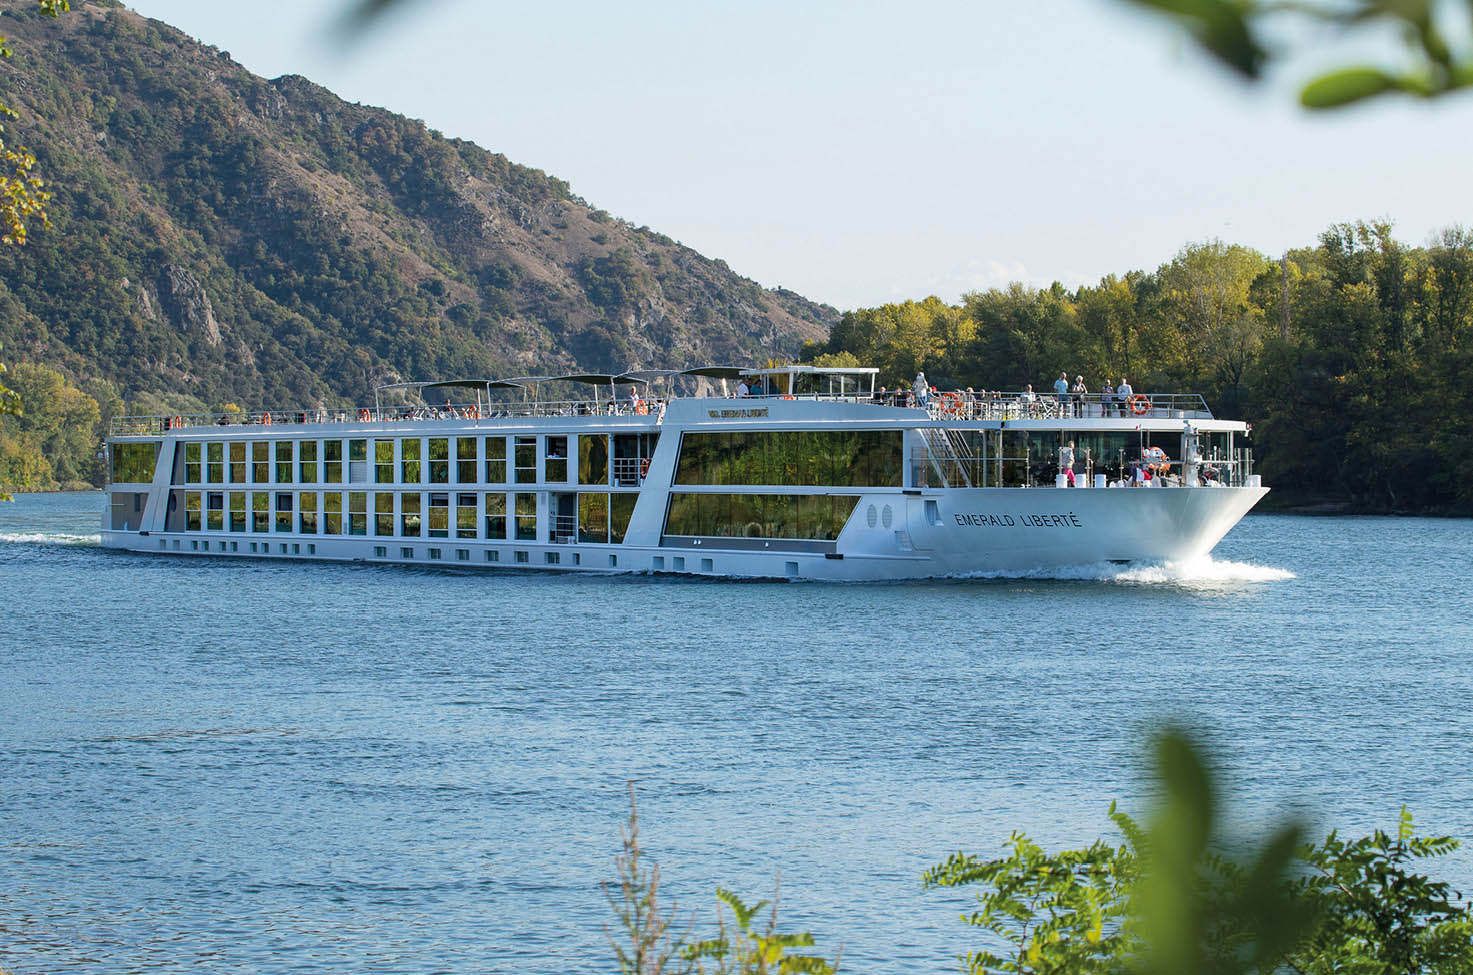 River cruise ship sailing the Rhone River past trees and hills